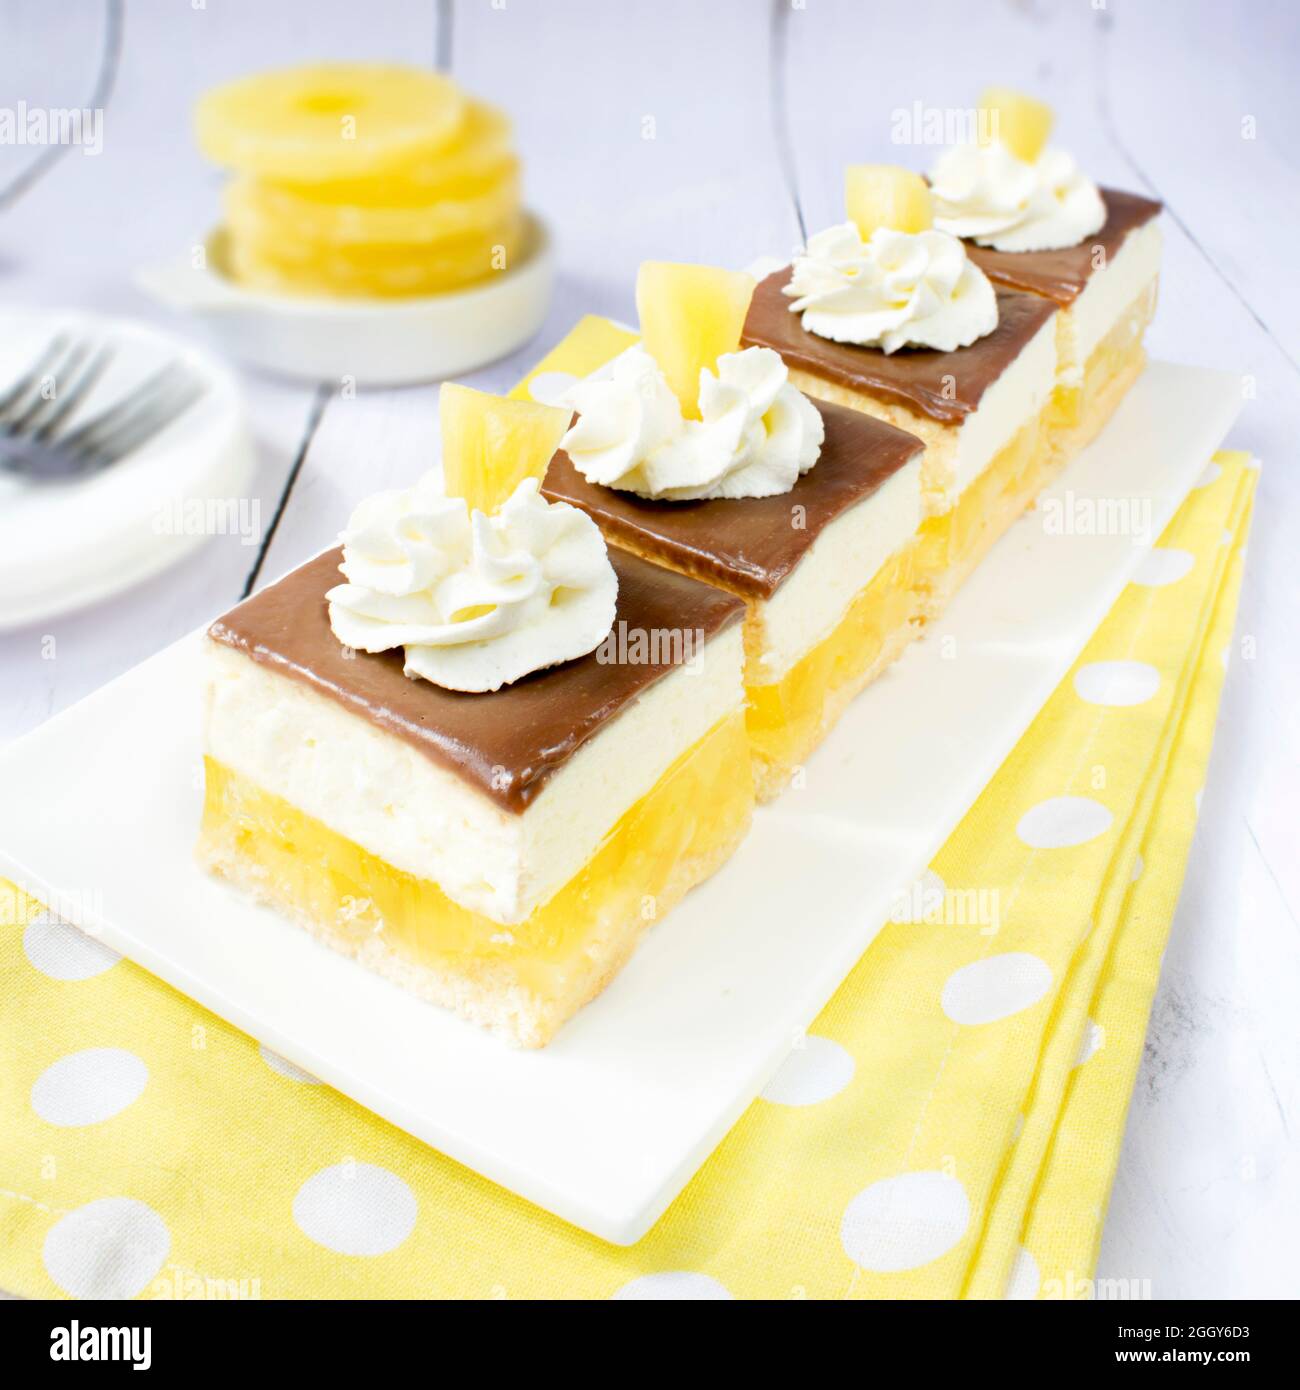 Homemade Pina Colada cake with jelly and fluffy coconut-pineapple foam. Stock Photo